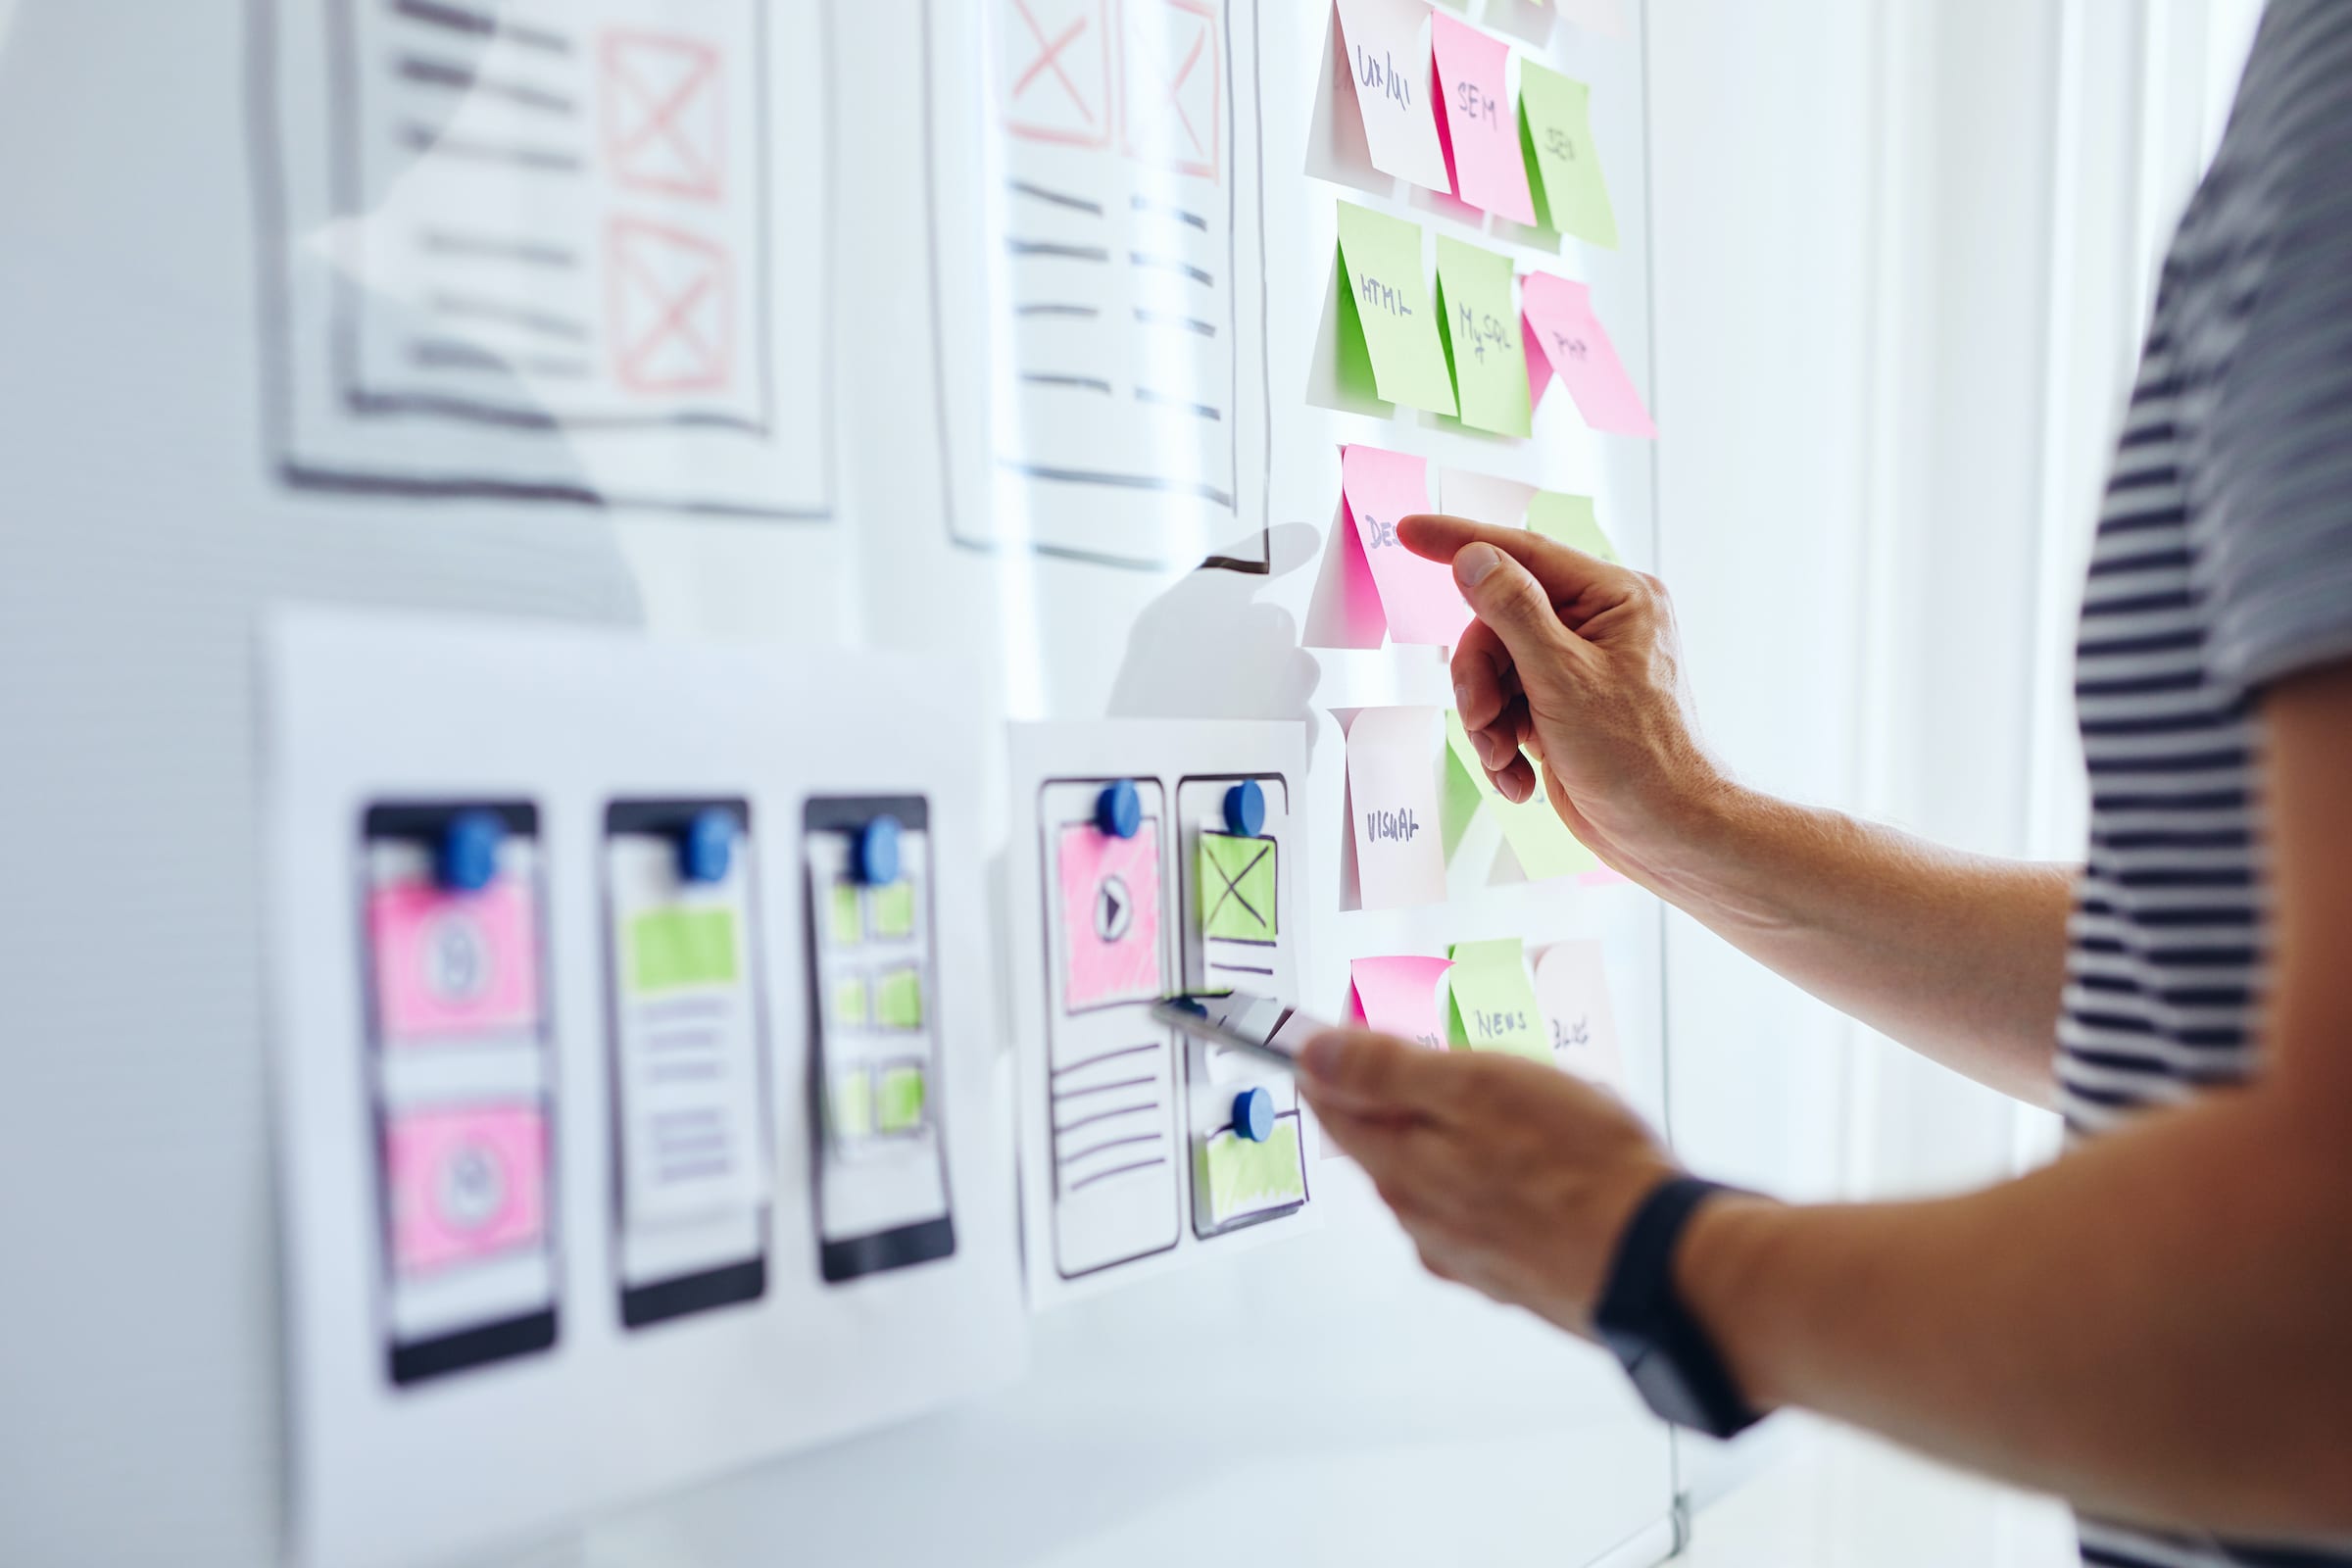 A UX designer reading sticky notes posted on a whiteboard with a moble application wireframe on it